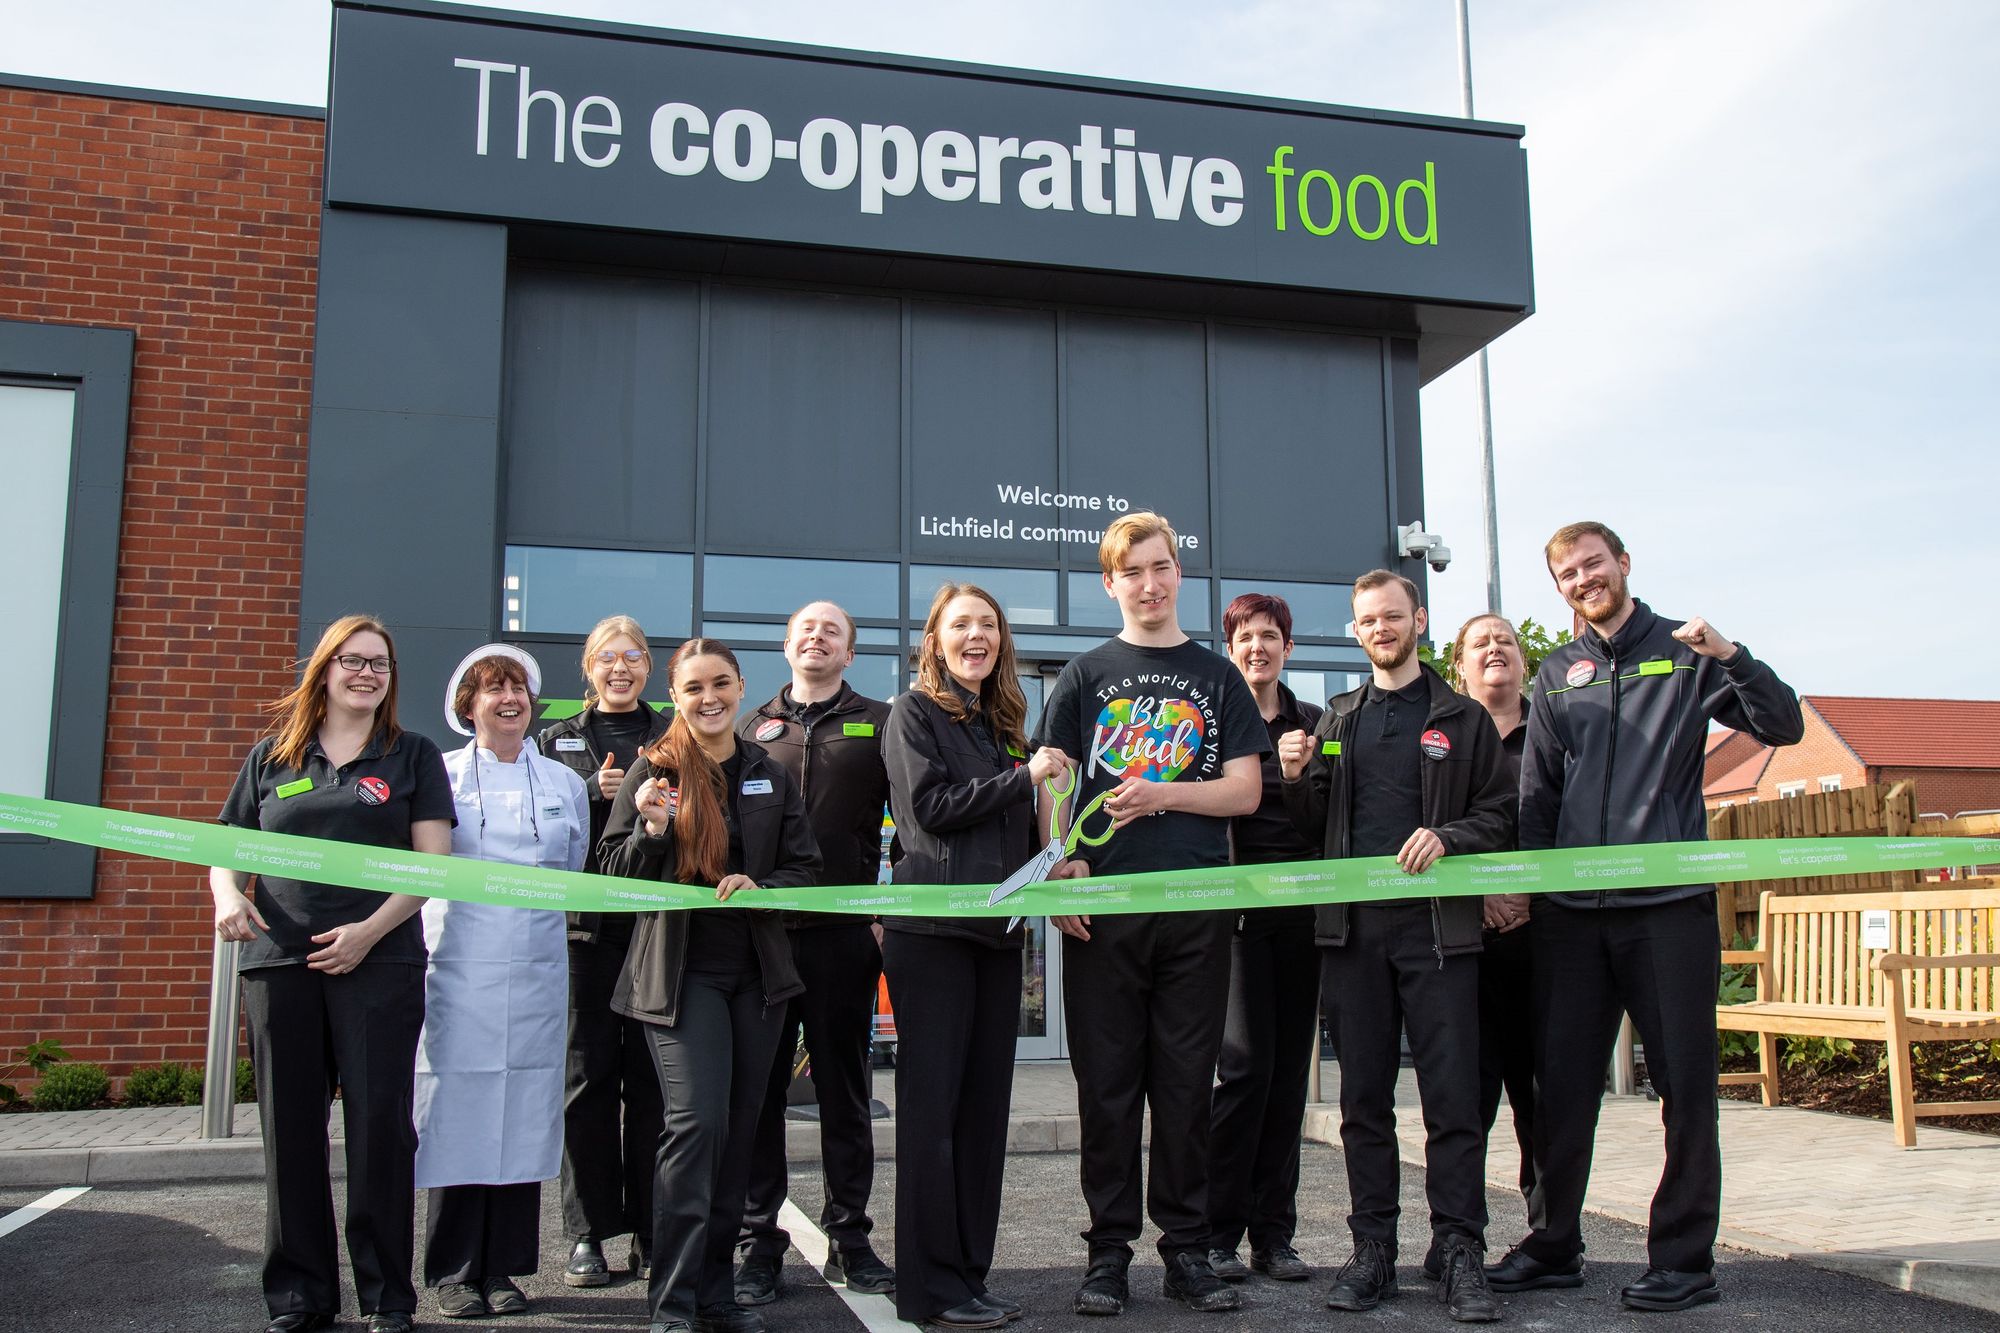 Central England Co-op officially opens its brand new store in Lichfield creating 11 new jobs